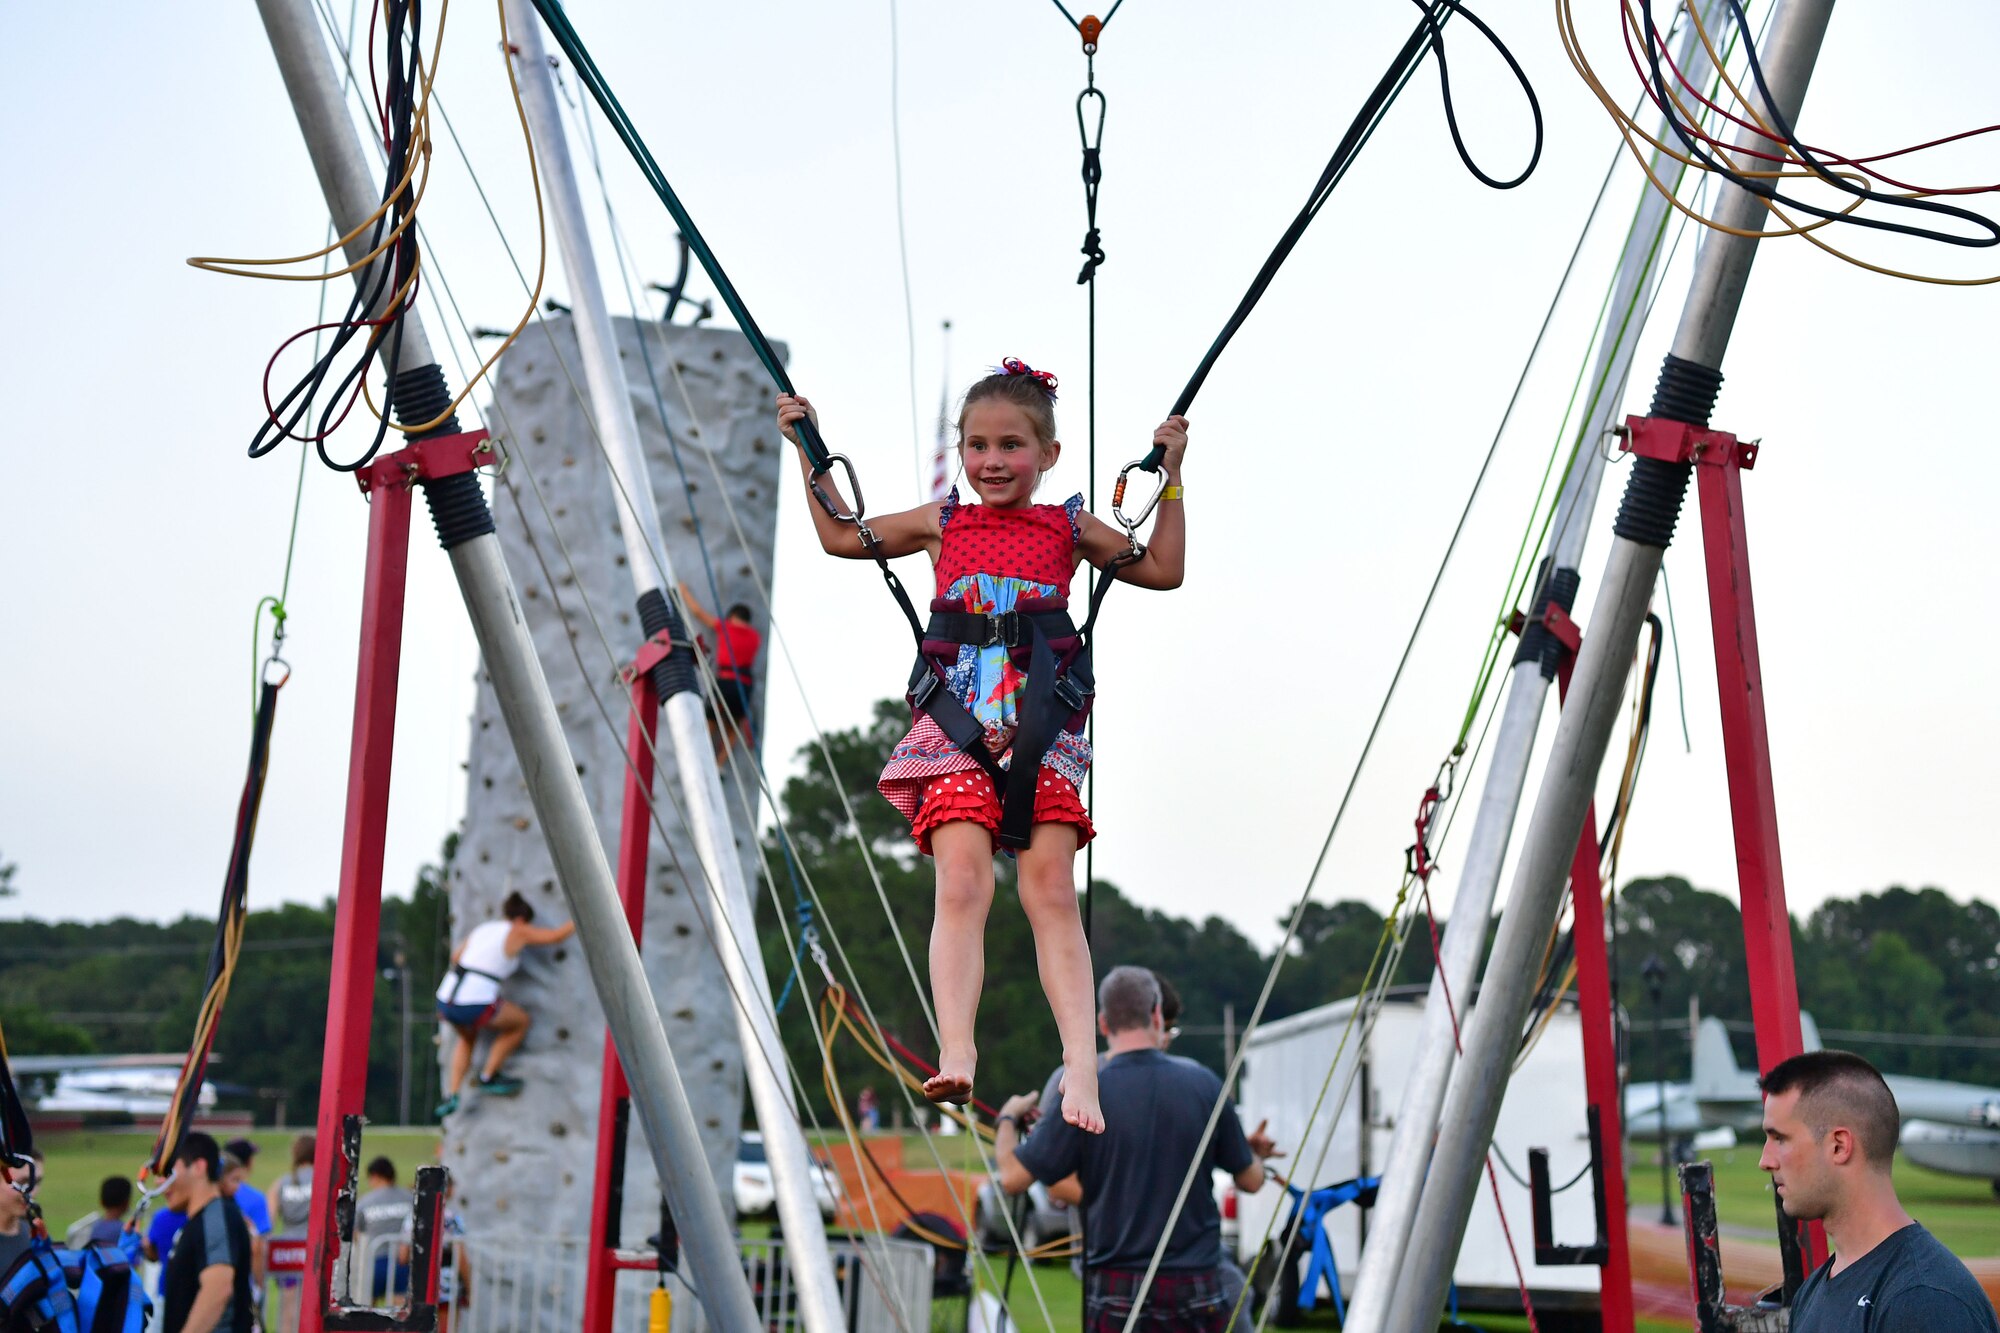 A child bounces on a bungee jumper.